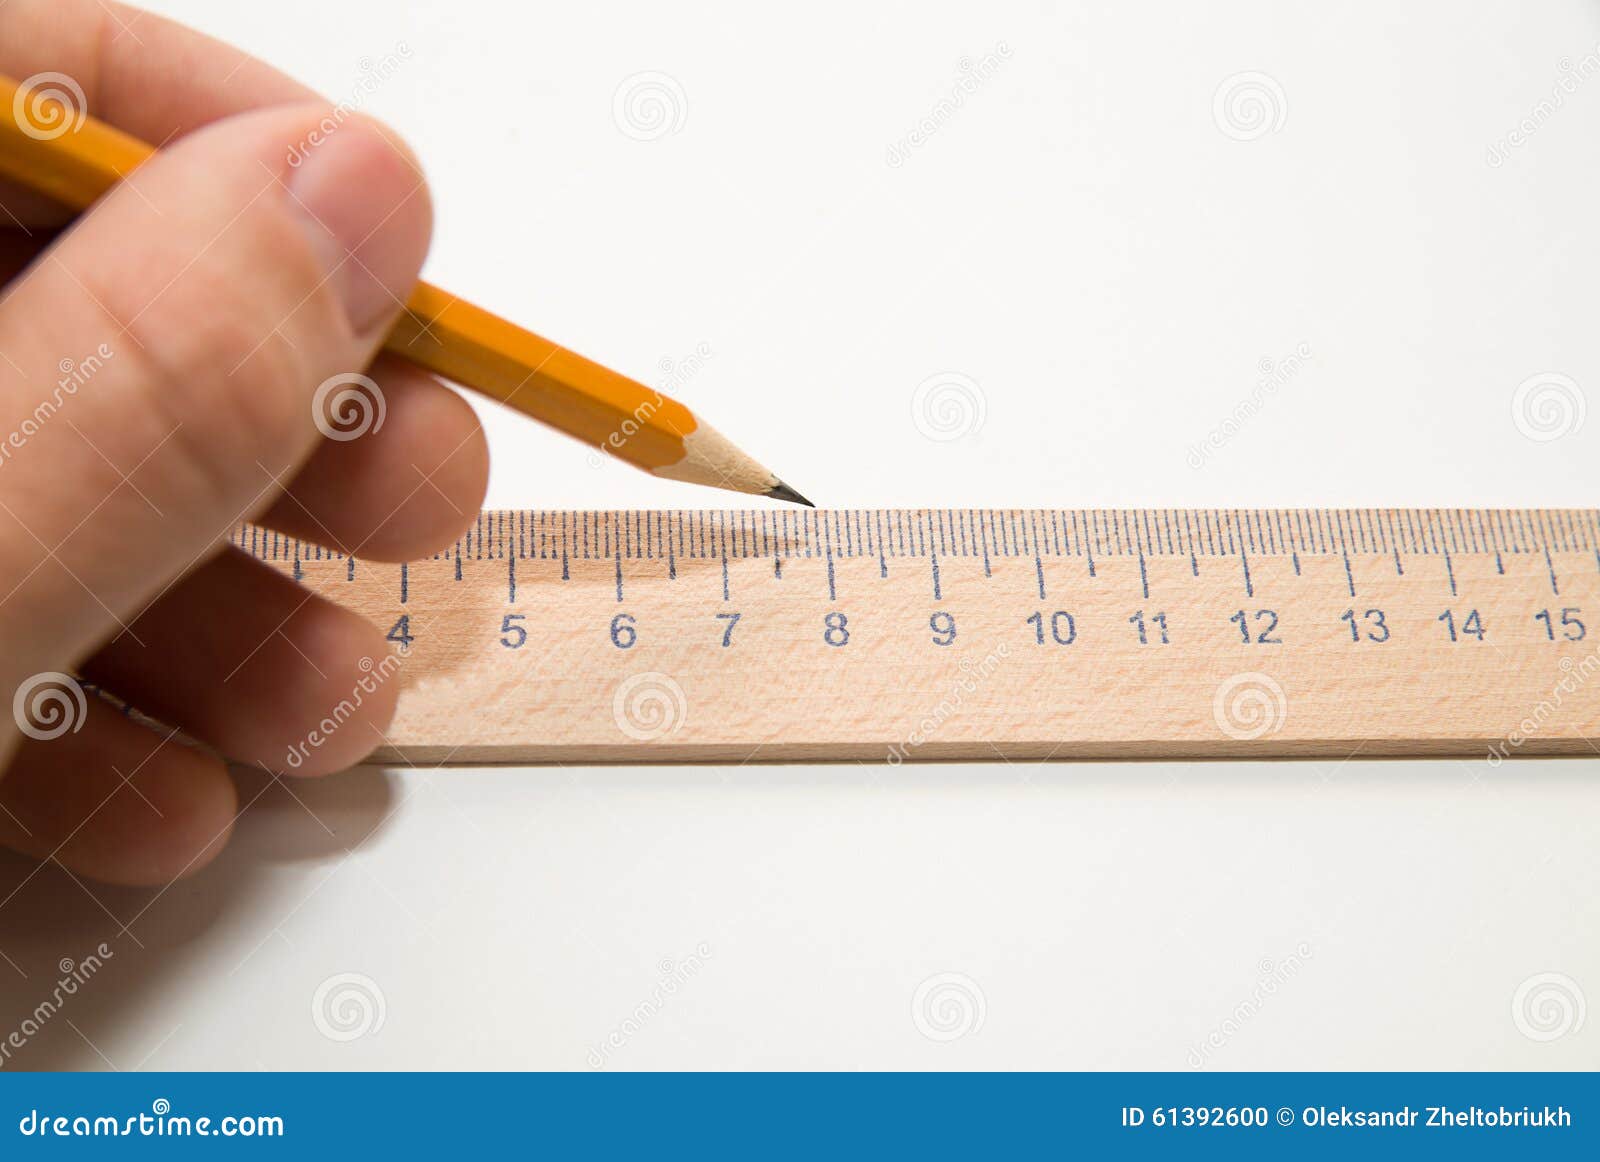 men's left hand holding a pencil on over white